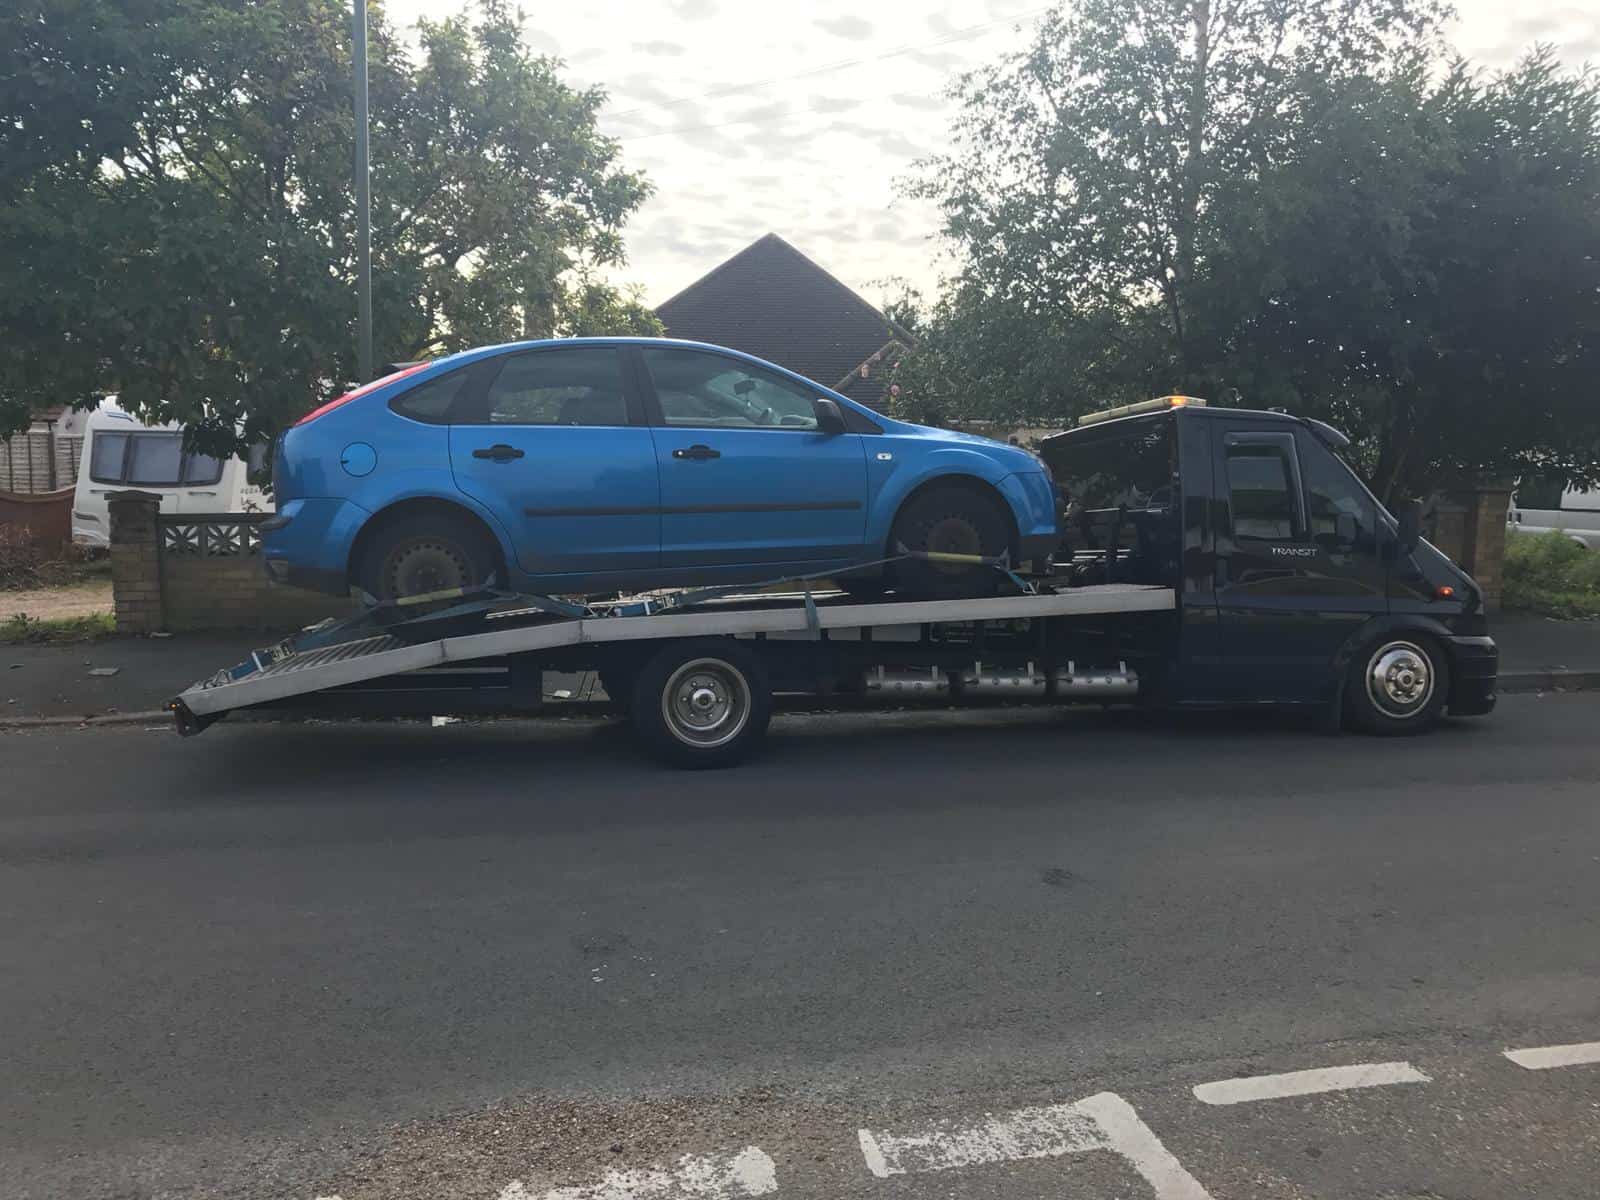 Car Recovery in Chertsey